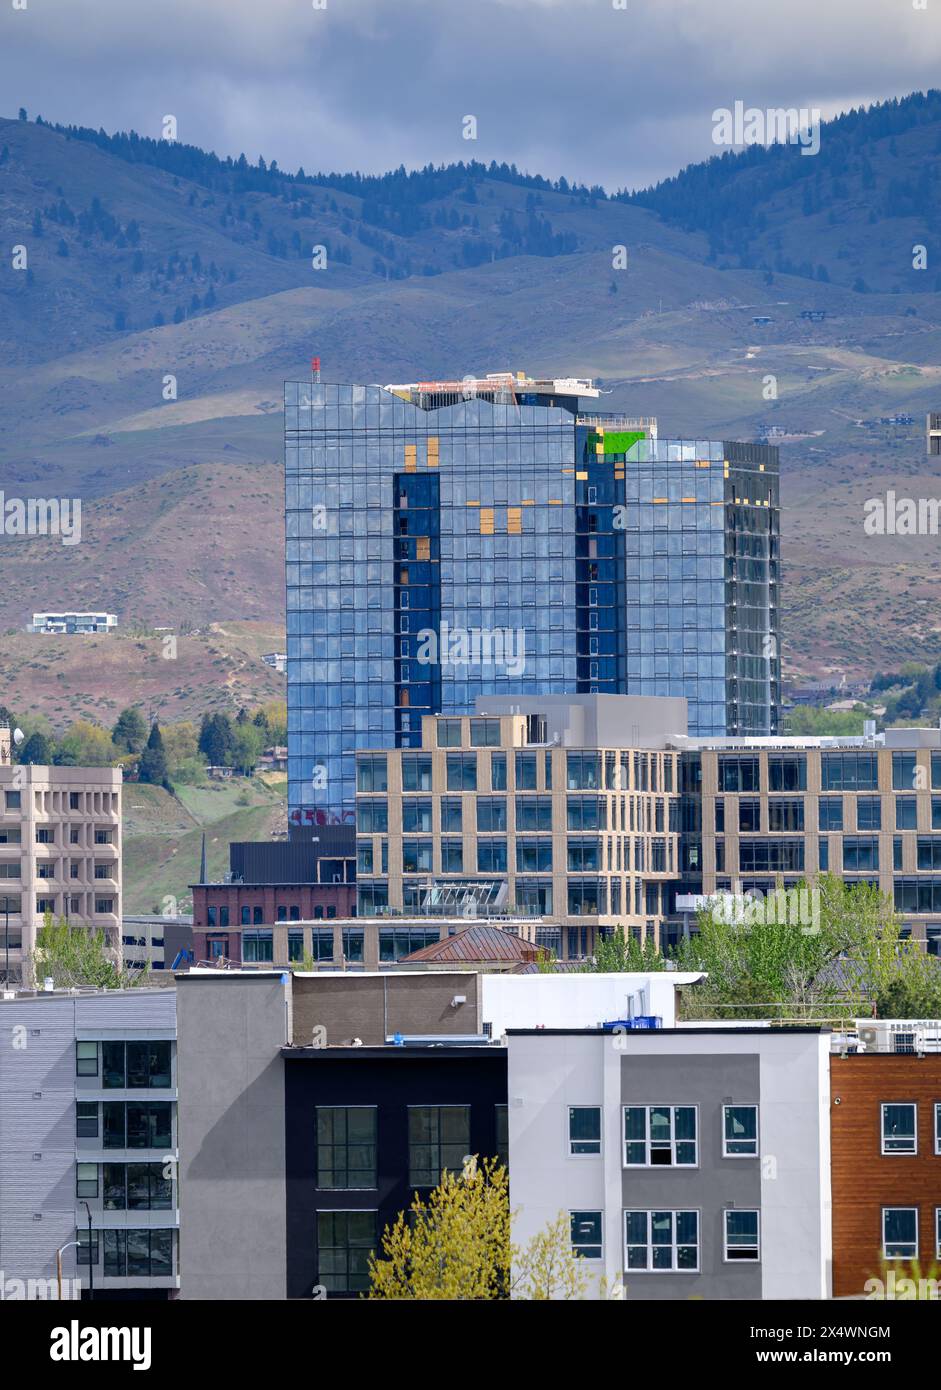 Addition to Boise skyline with foothills backdrop Stock Photo